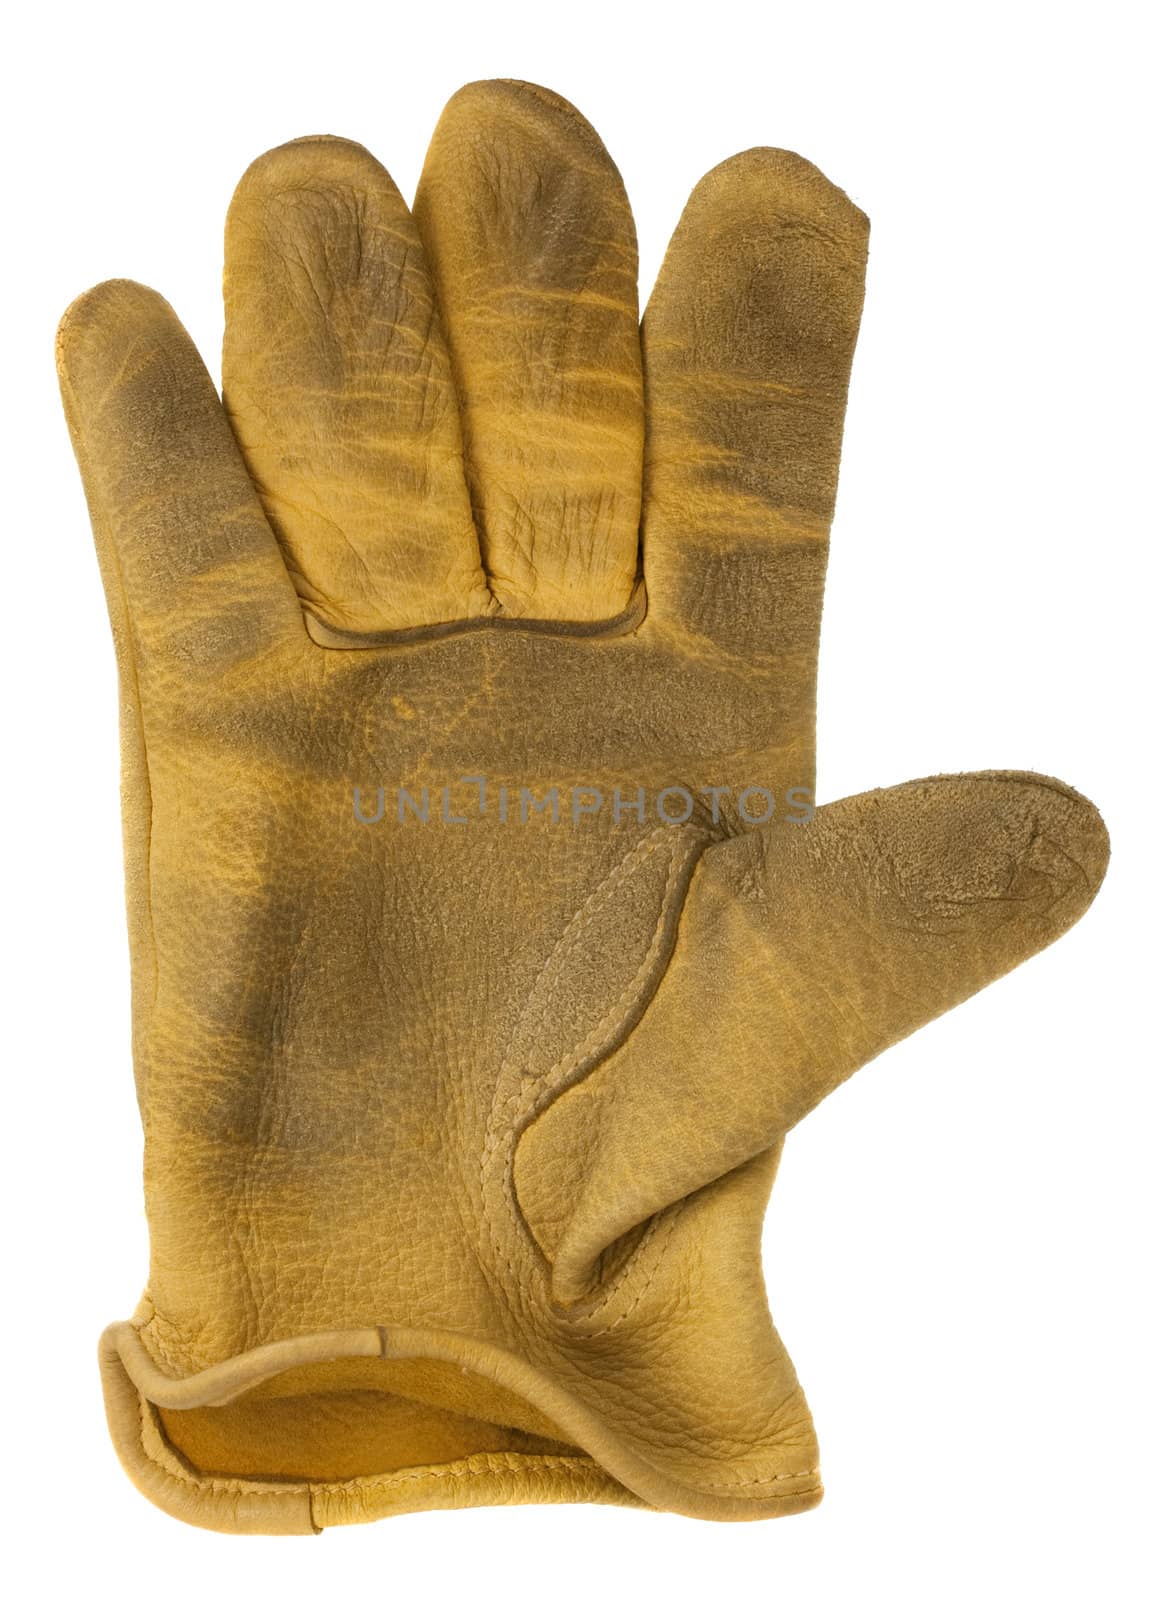 worn out yellow leather glove by PixelsAway